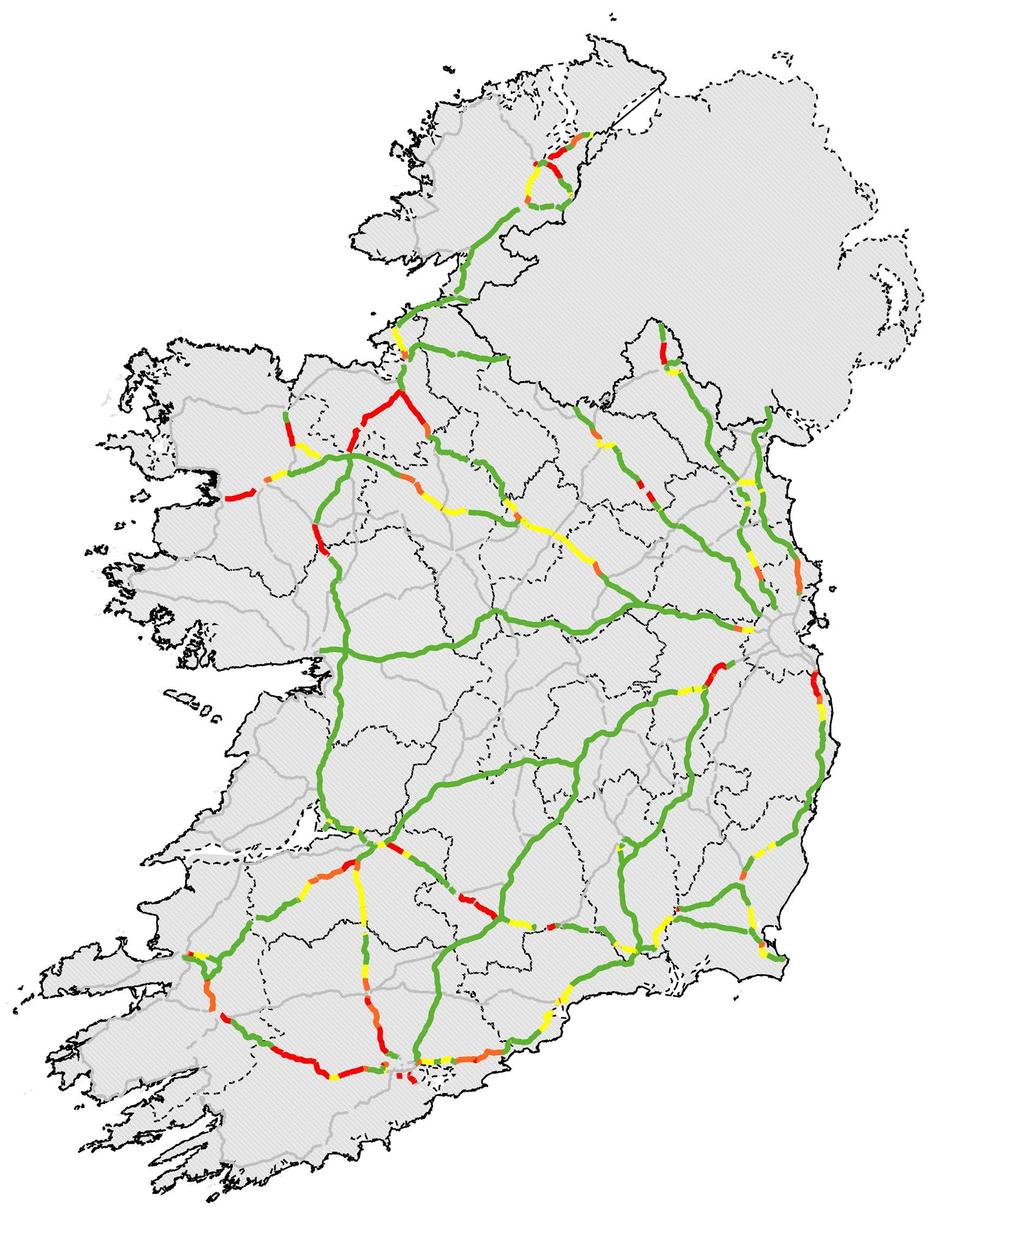 ONE ROAD NETWORK C2: VOLUME TO CAPACITY RATIO: NATIONAL PRIMARY ROADS Proportion of the National Primary Roads network operating at each level of capacity 11 The Volume to Capacity (V/C) Ratio